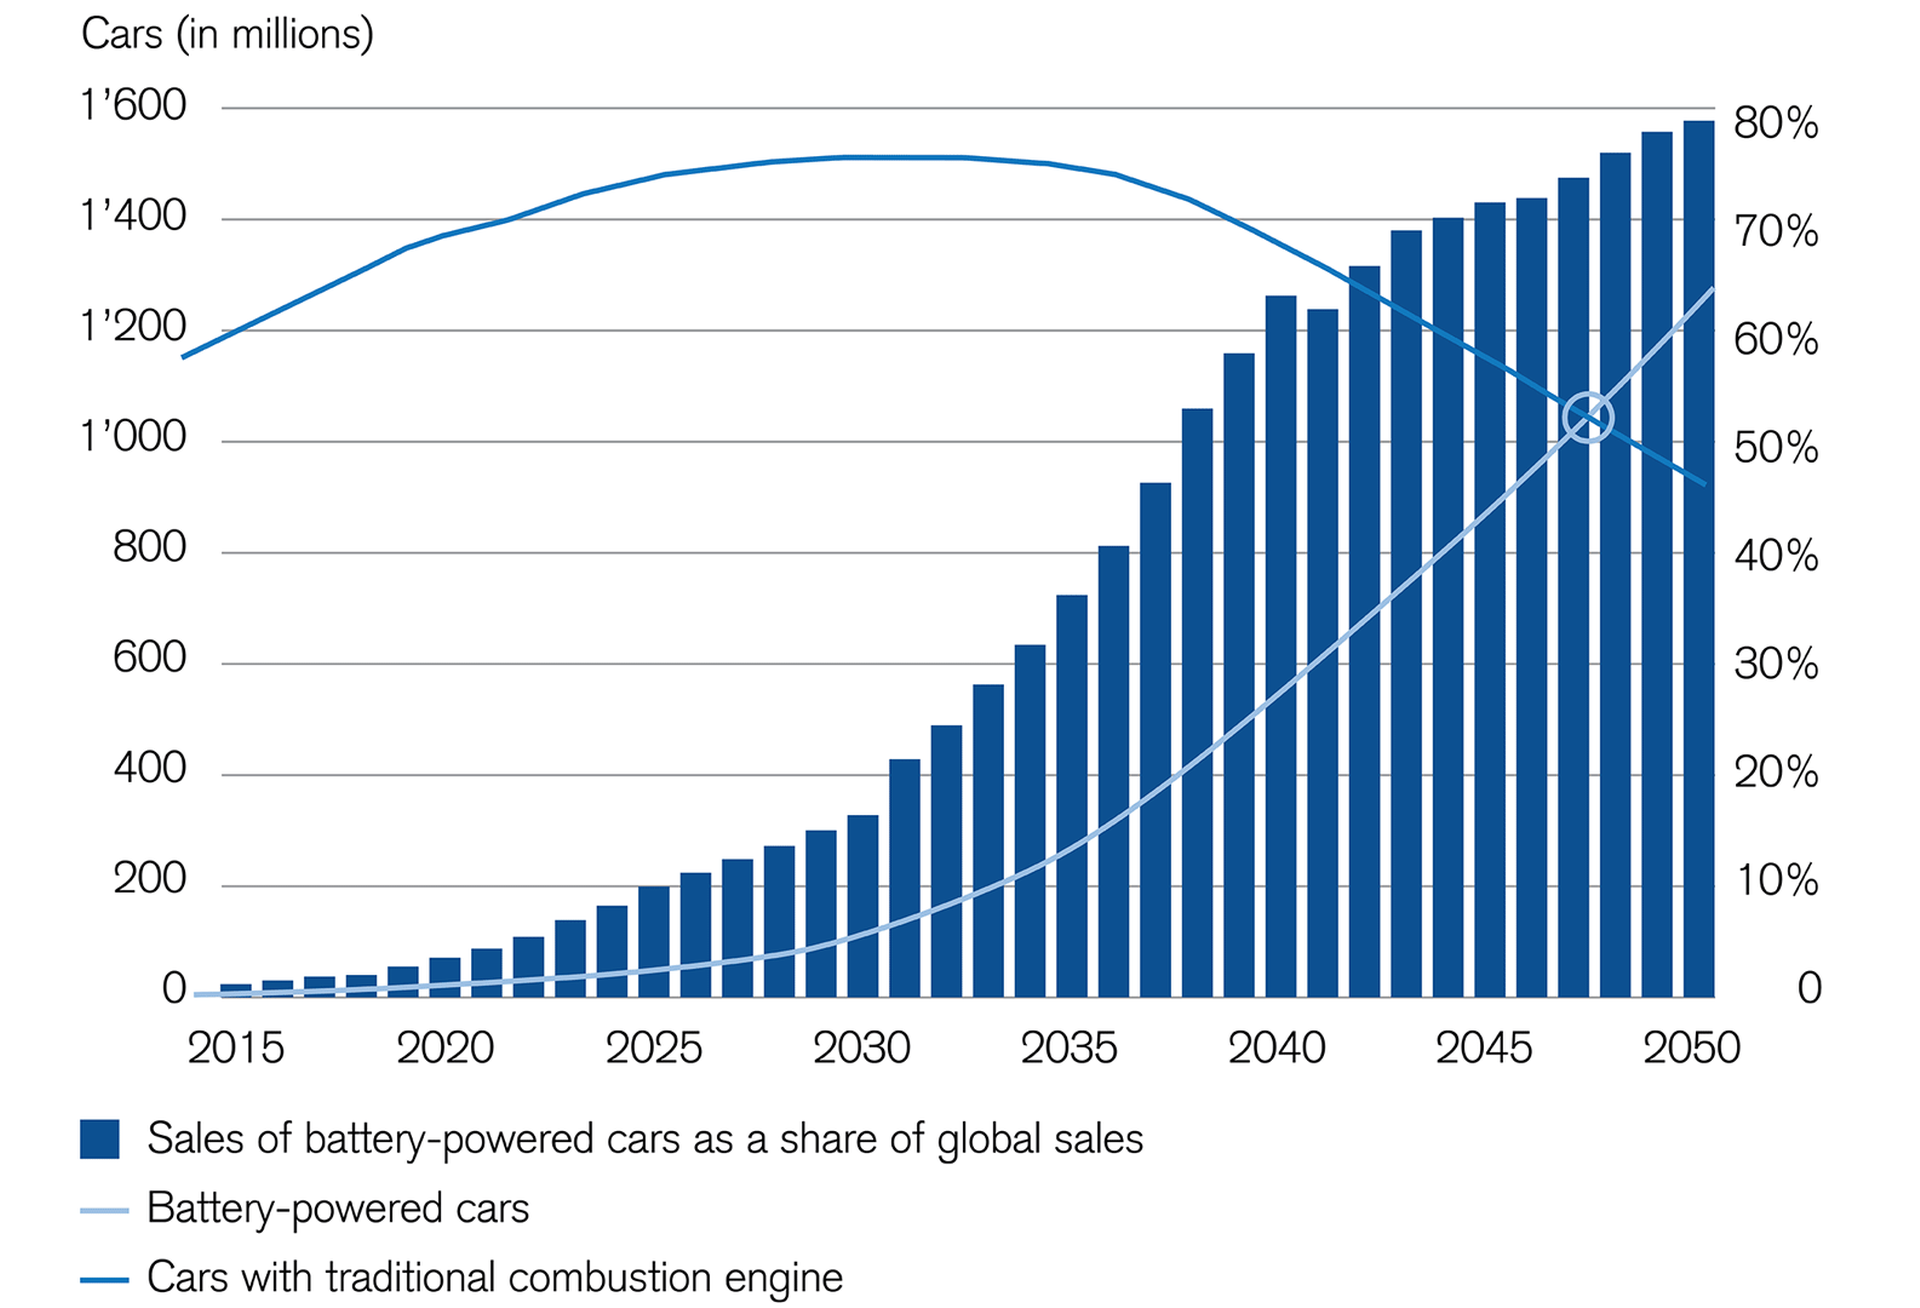 electromobility-is-booming-with-rising-numbers-of-electric-cars